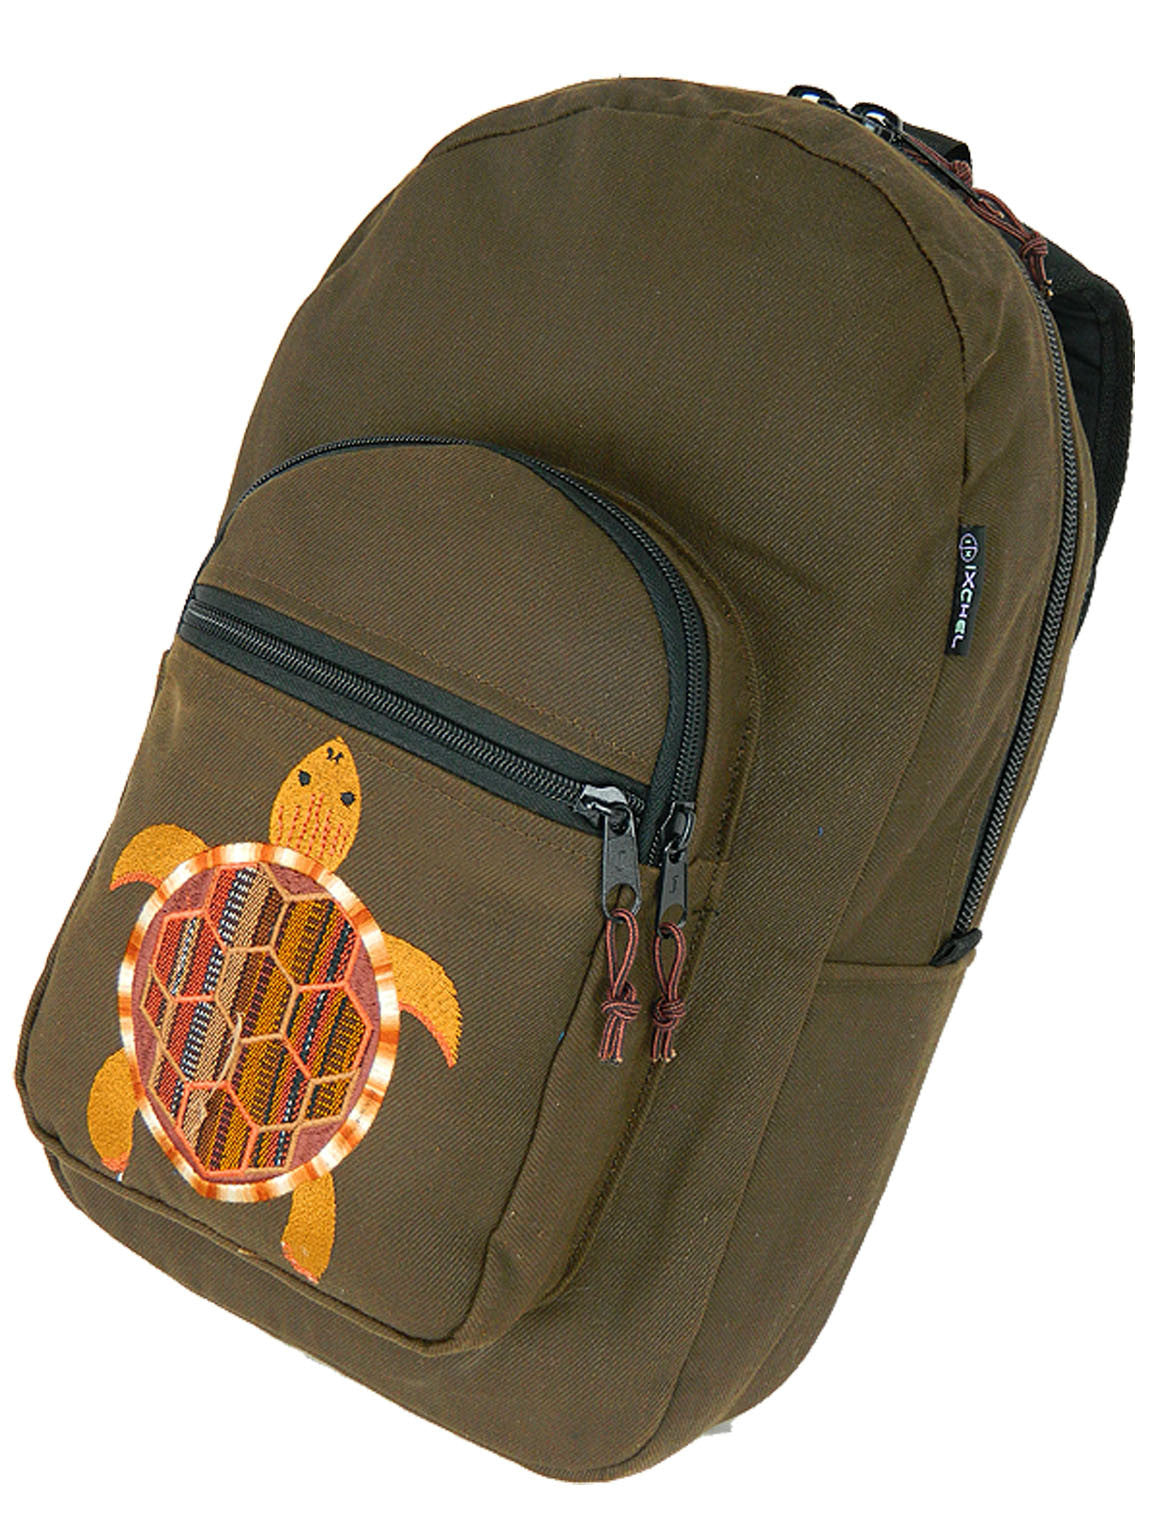 Denim Backpack with Ikat Terrapin Embroidery (Medium)